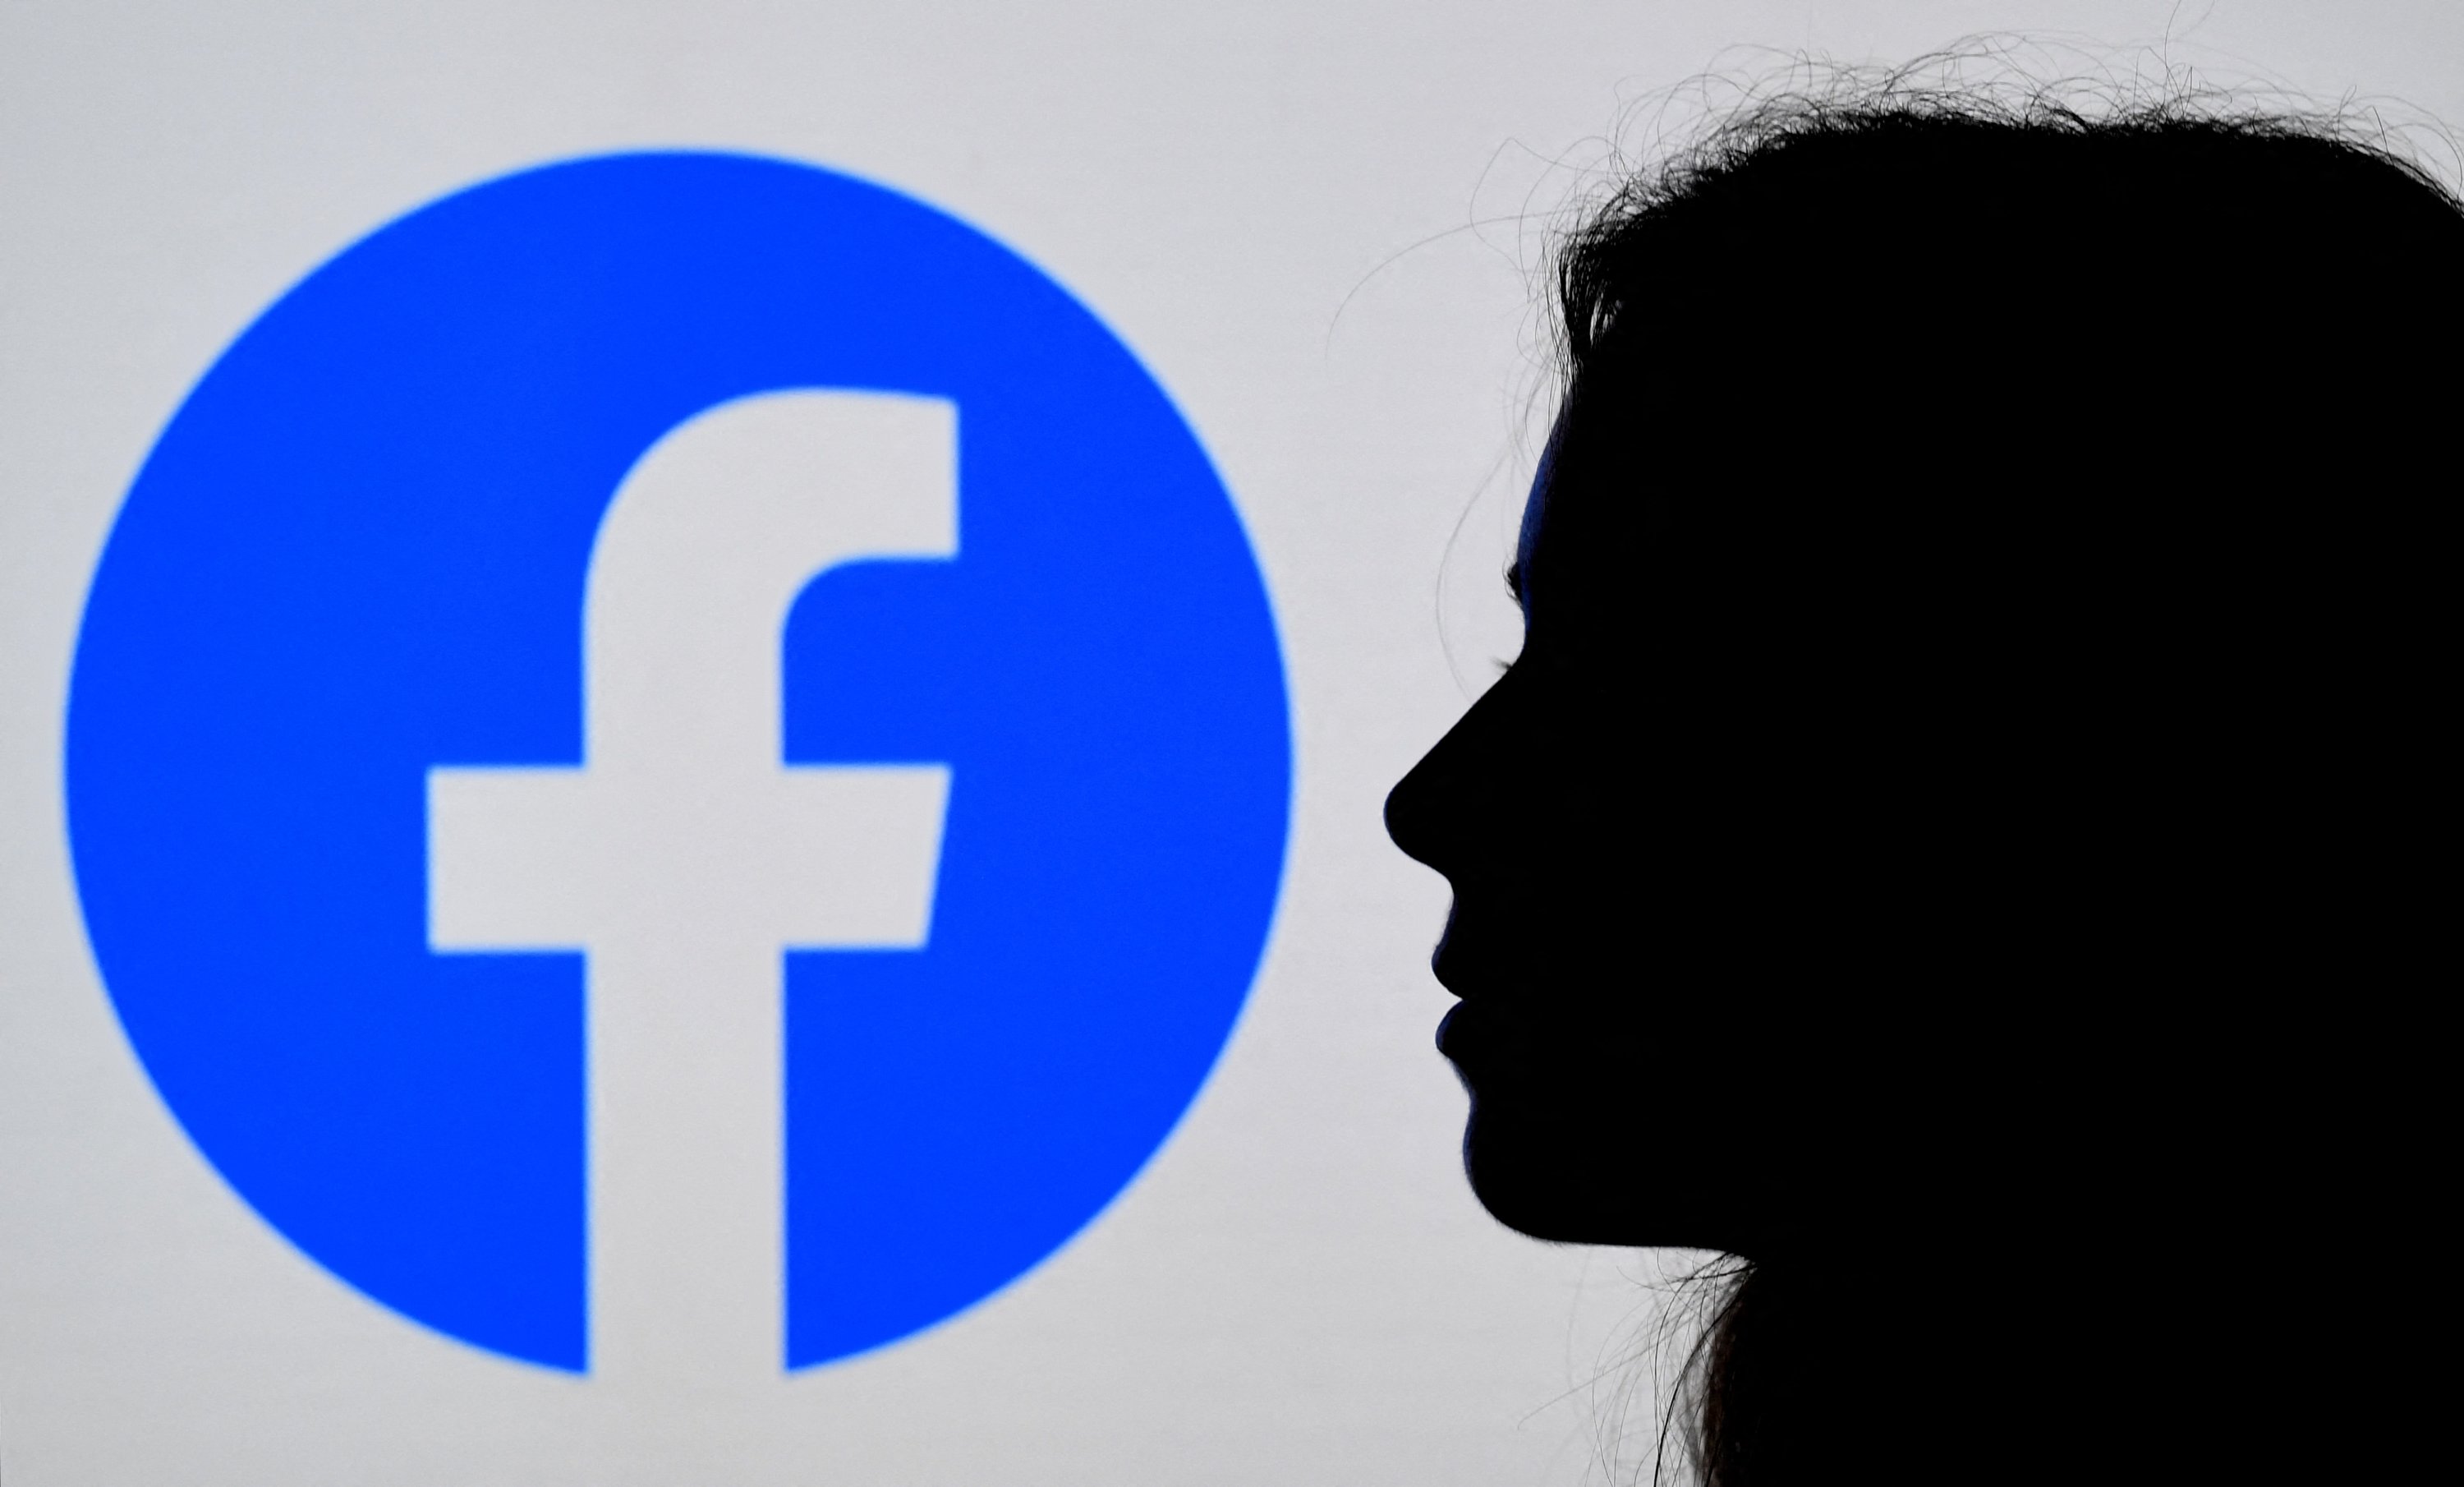 Facebook has 3 billion users, but younger users quitting platform